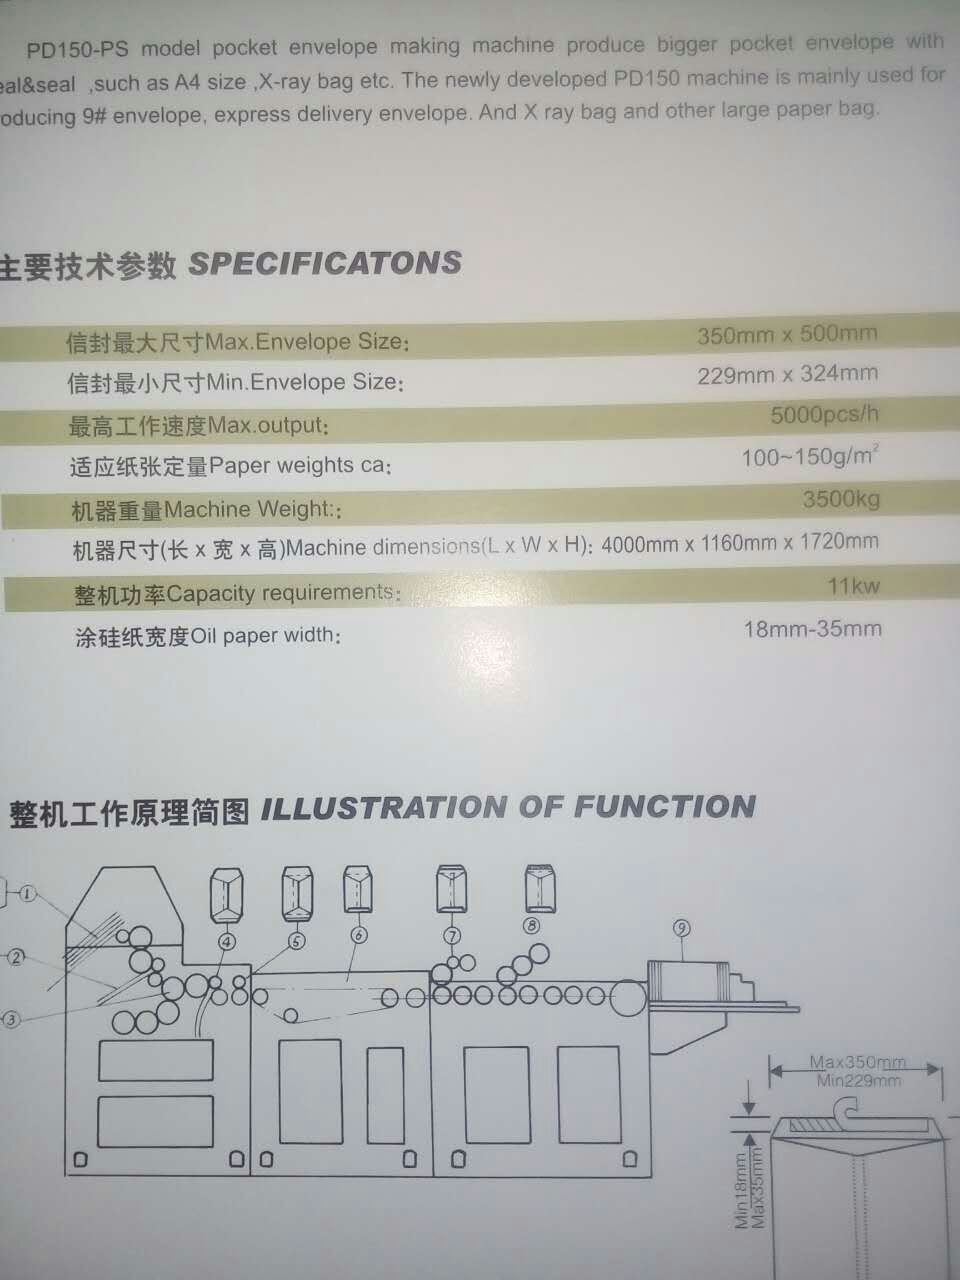 specification of YX350PS envelope making machine